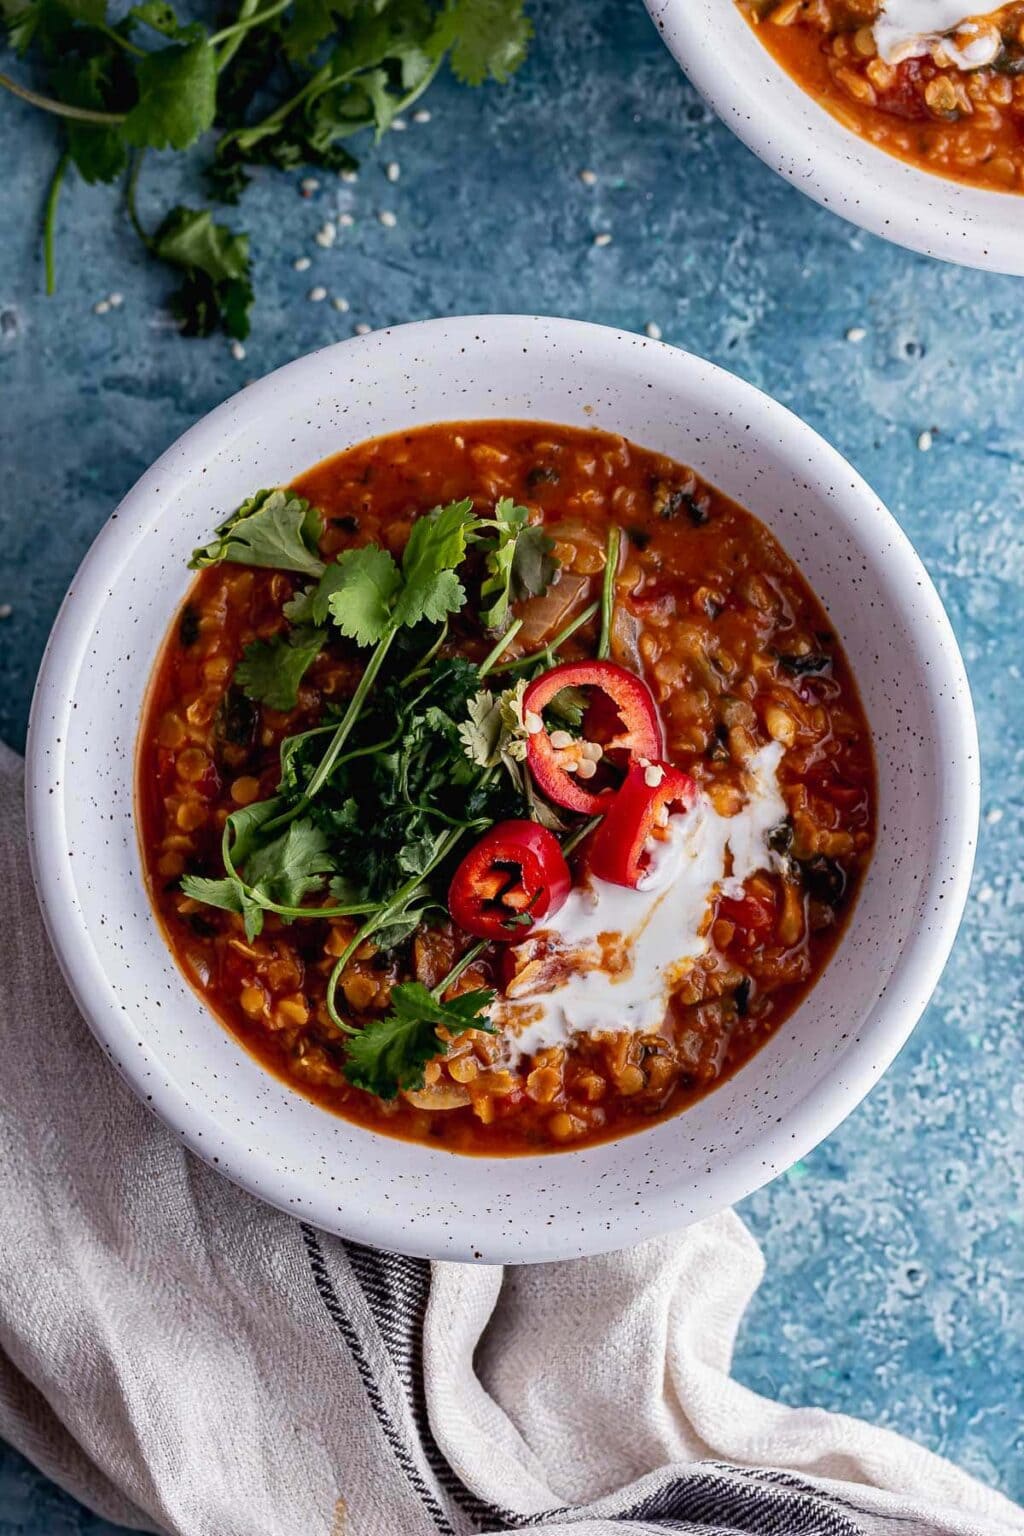 Spicy Lentil Soup with Coconut • The Cook Report